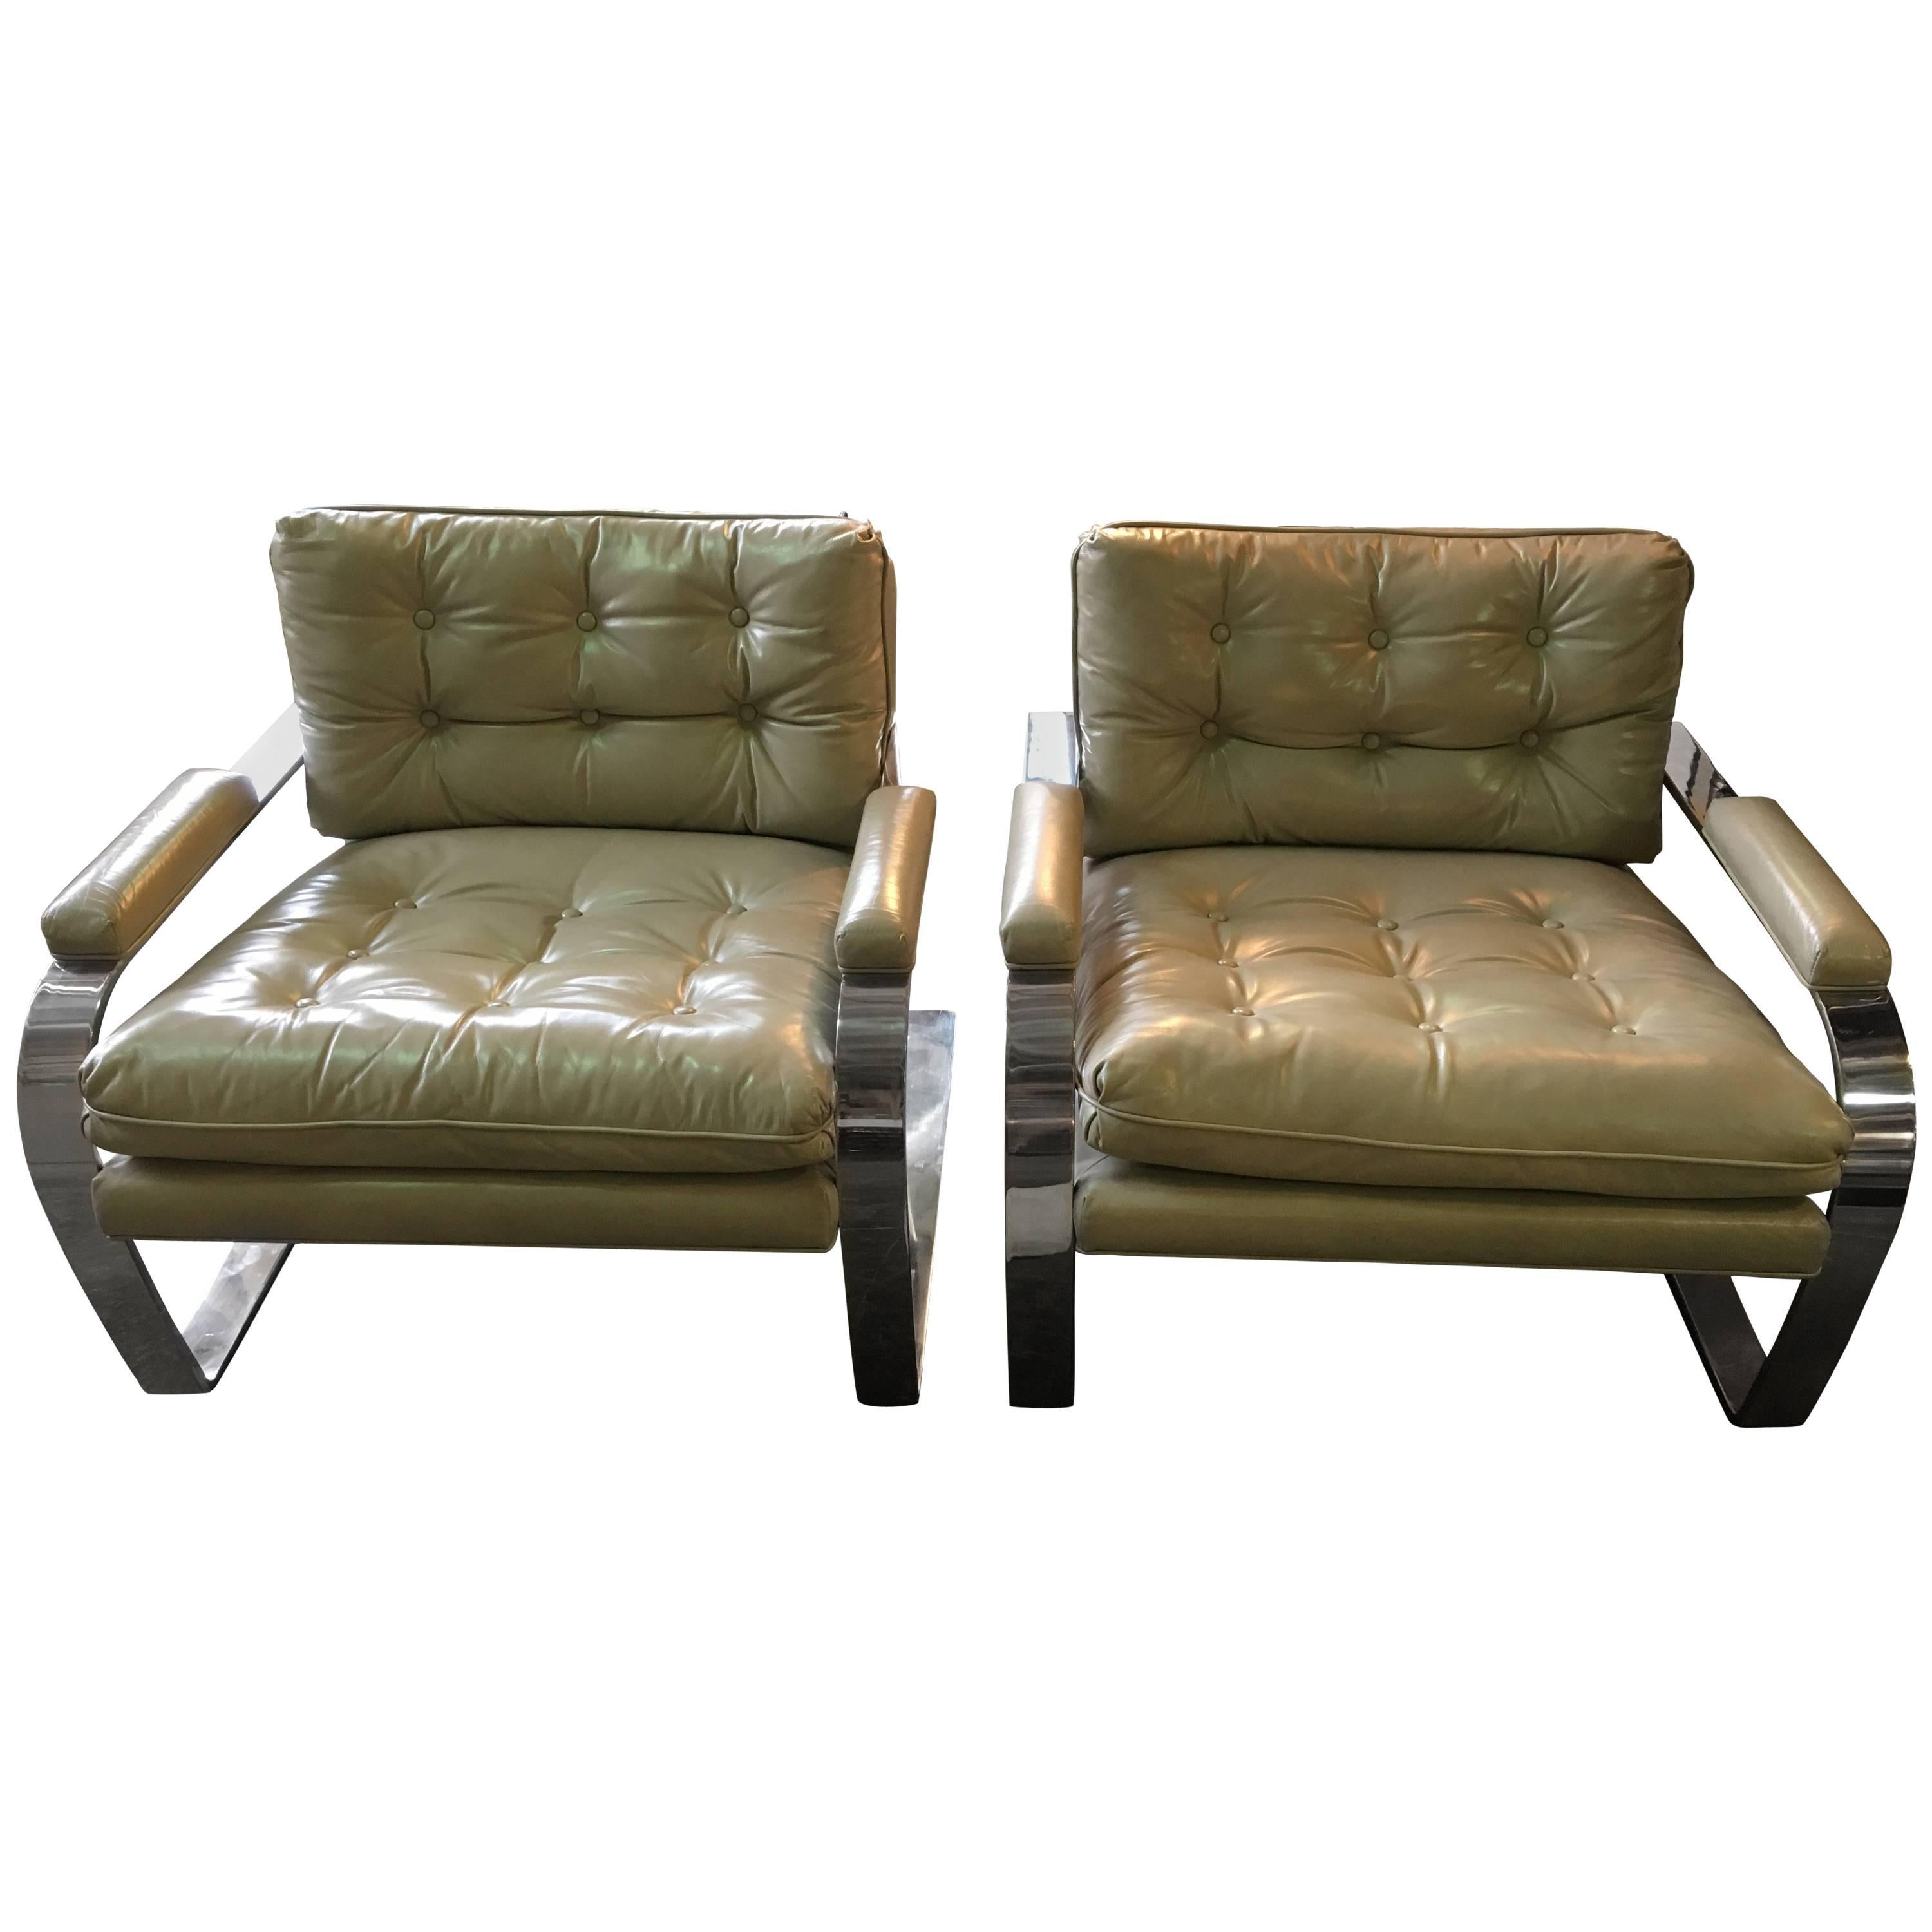 Pair of Milo Baughman Chrome and Leather Lounge Chairs